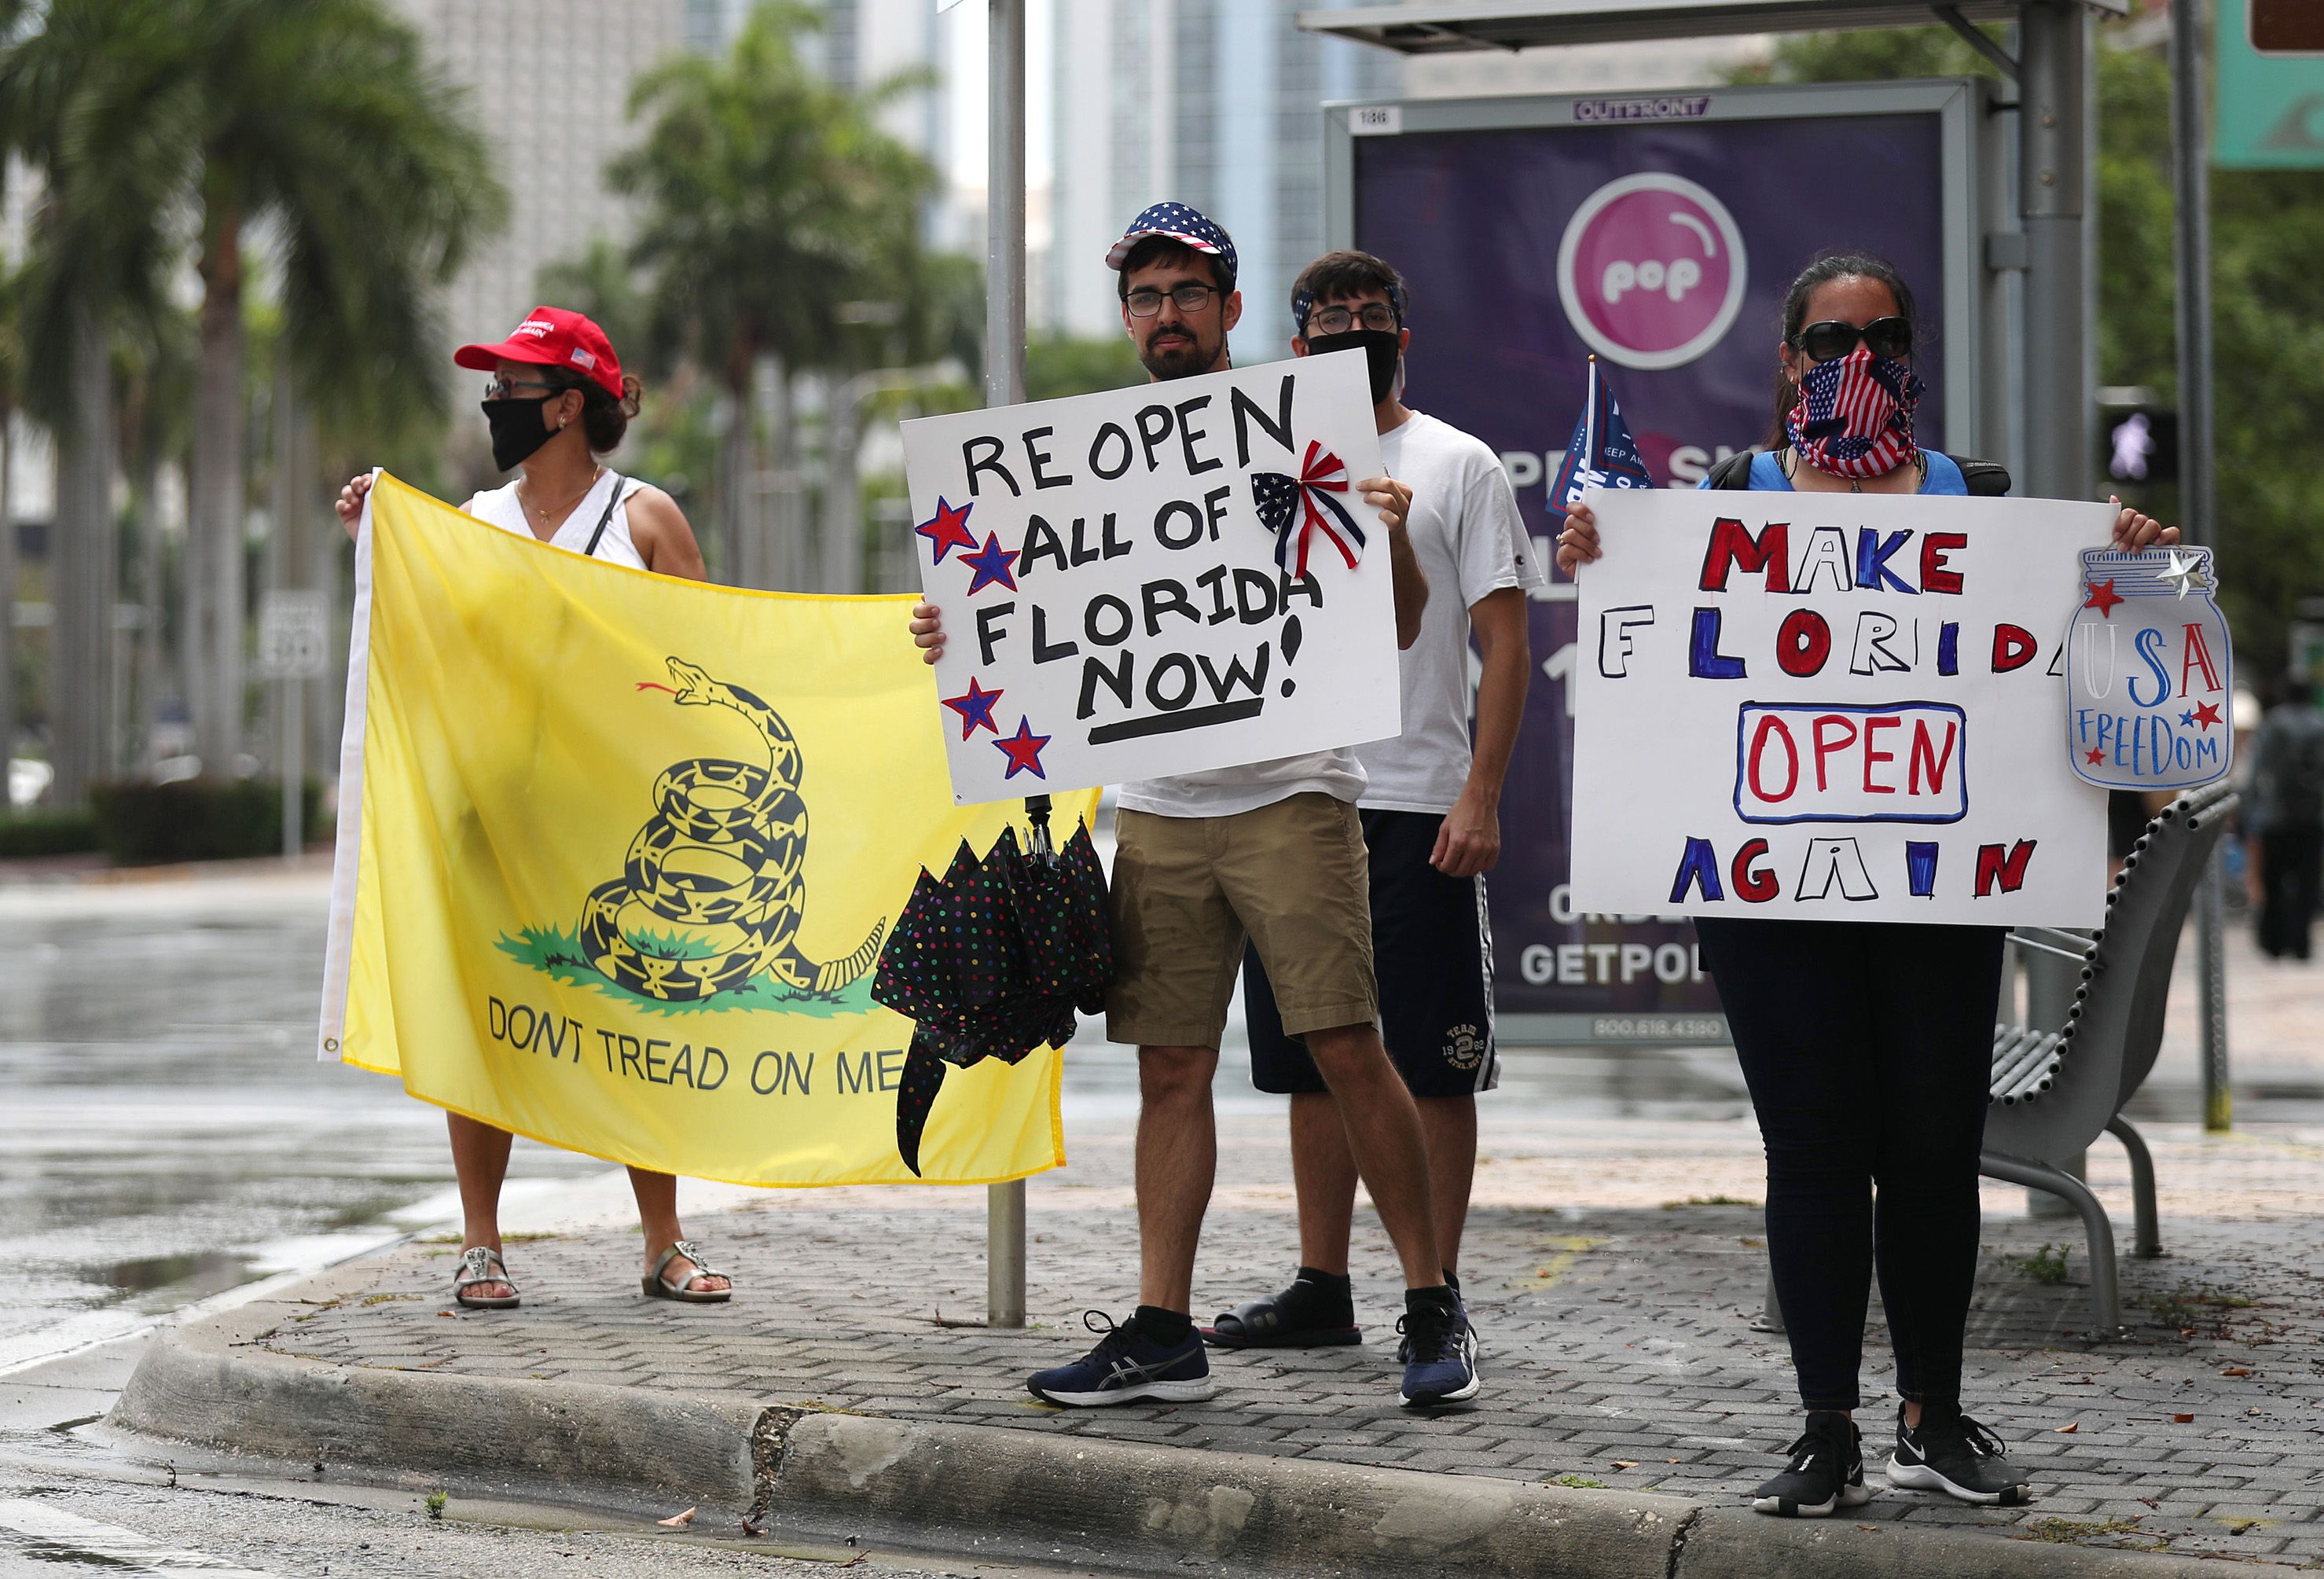 In this image, three signs are held by protestors: one reads "Make Florida open again" another reads "reopen all of florida now" and another reads "don't tread on me"